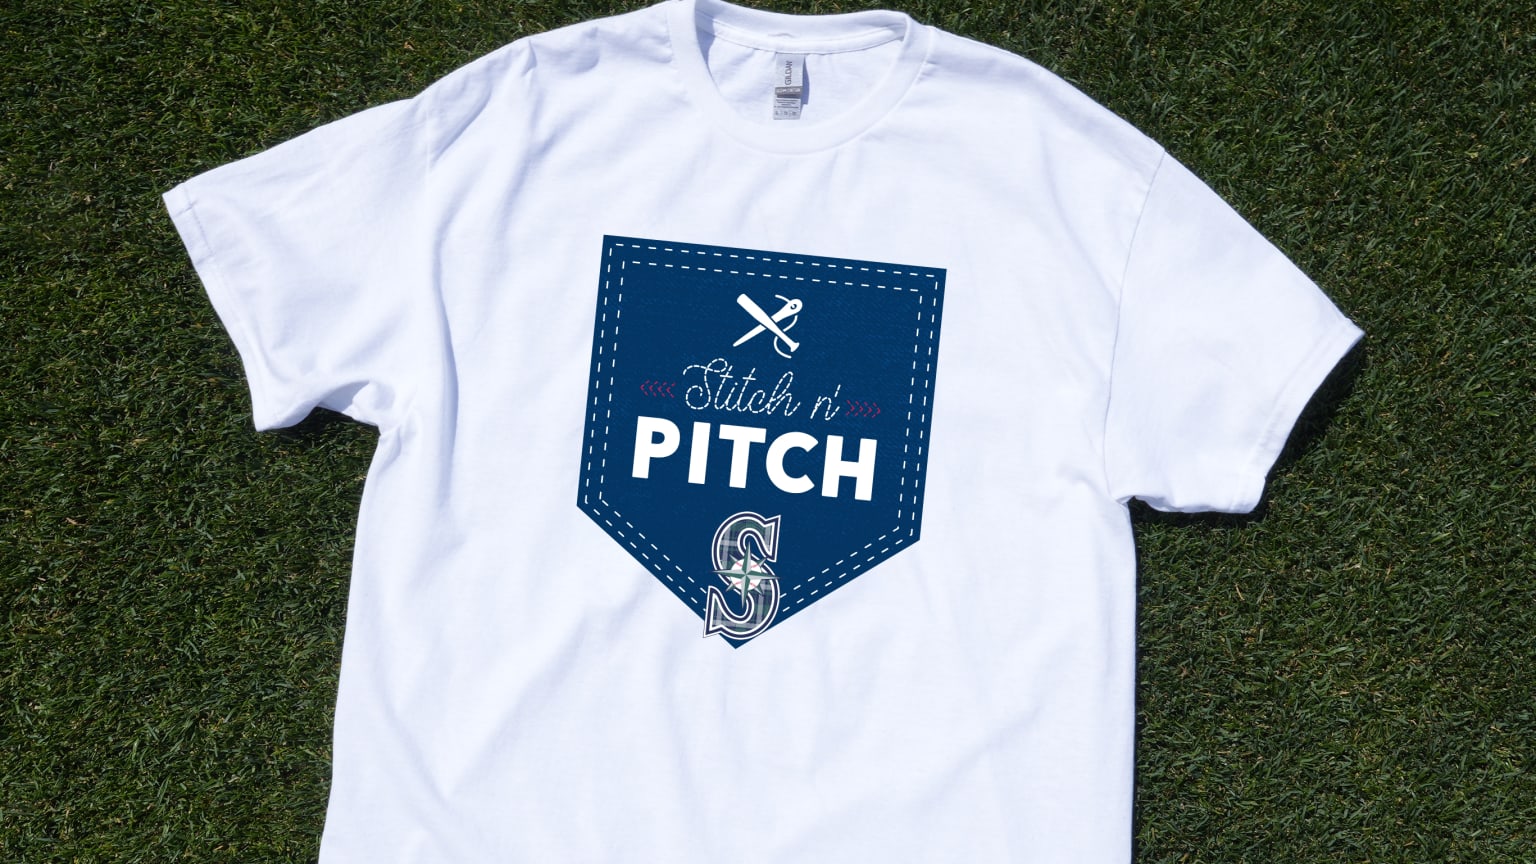 Seattle Mariners - Set phasers to stun for Star Trek Night at